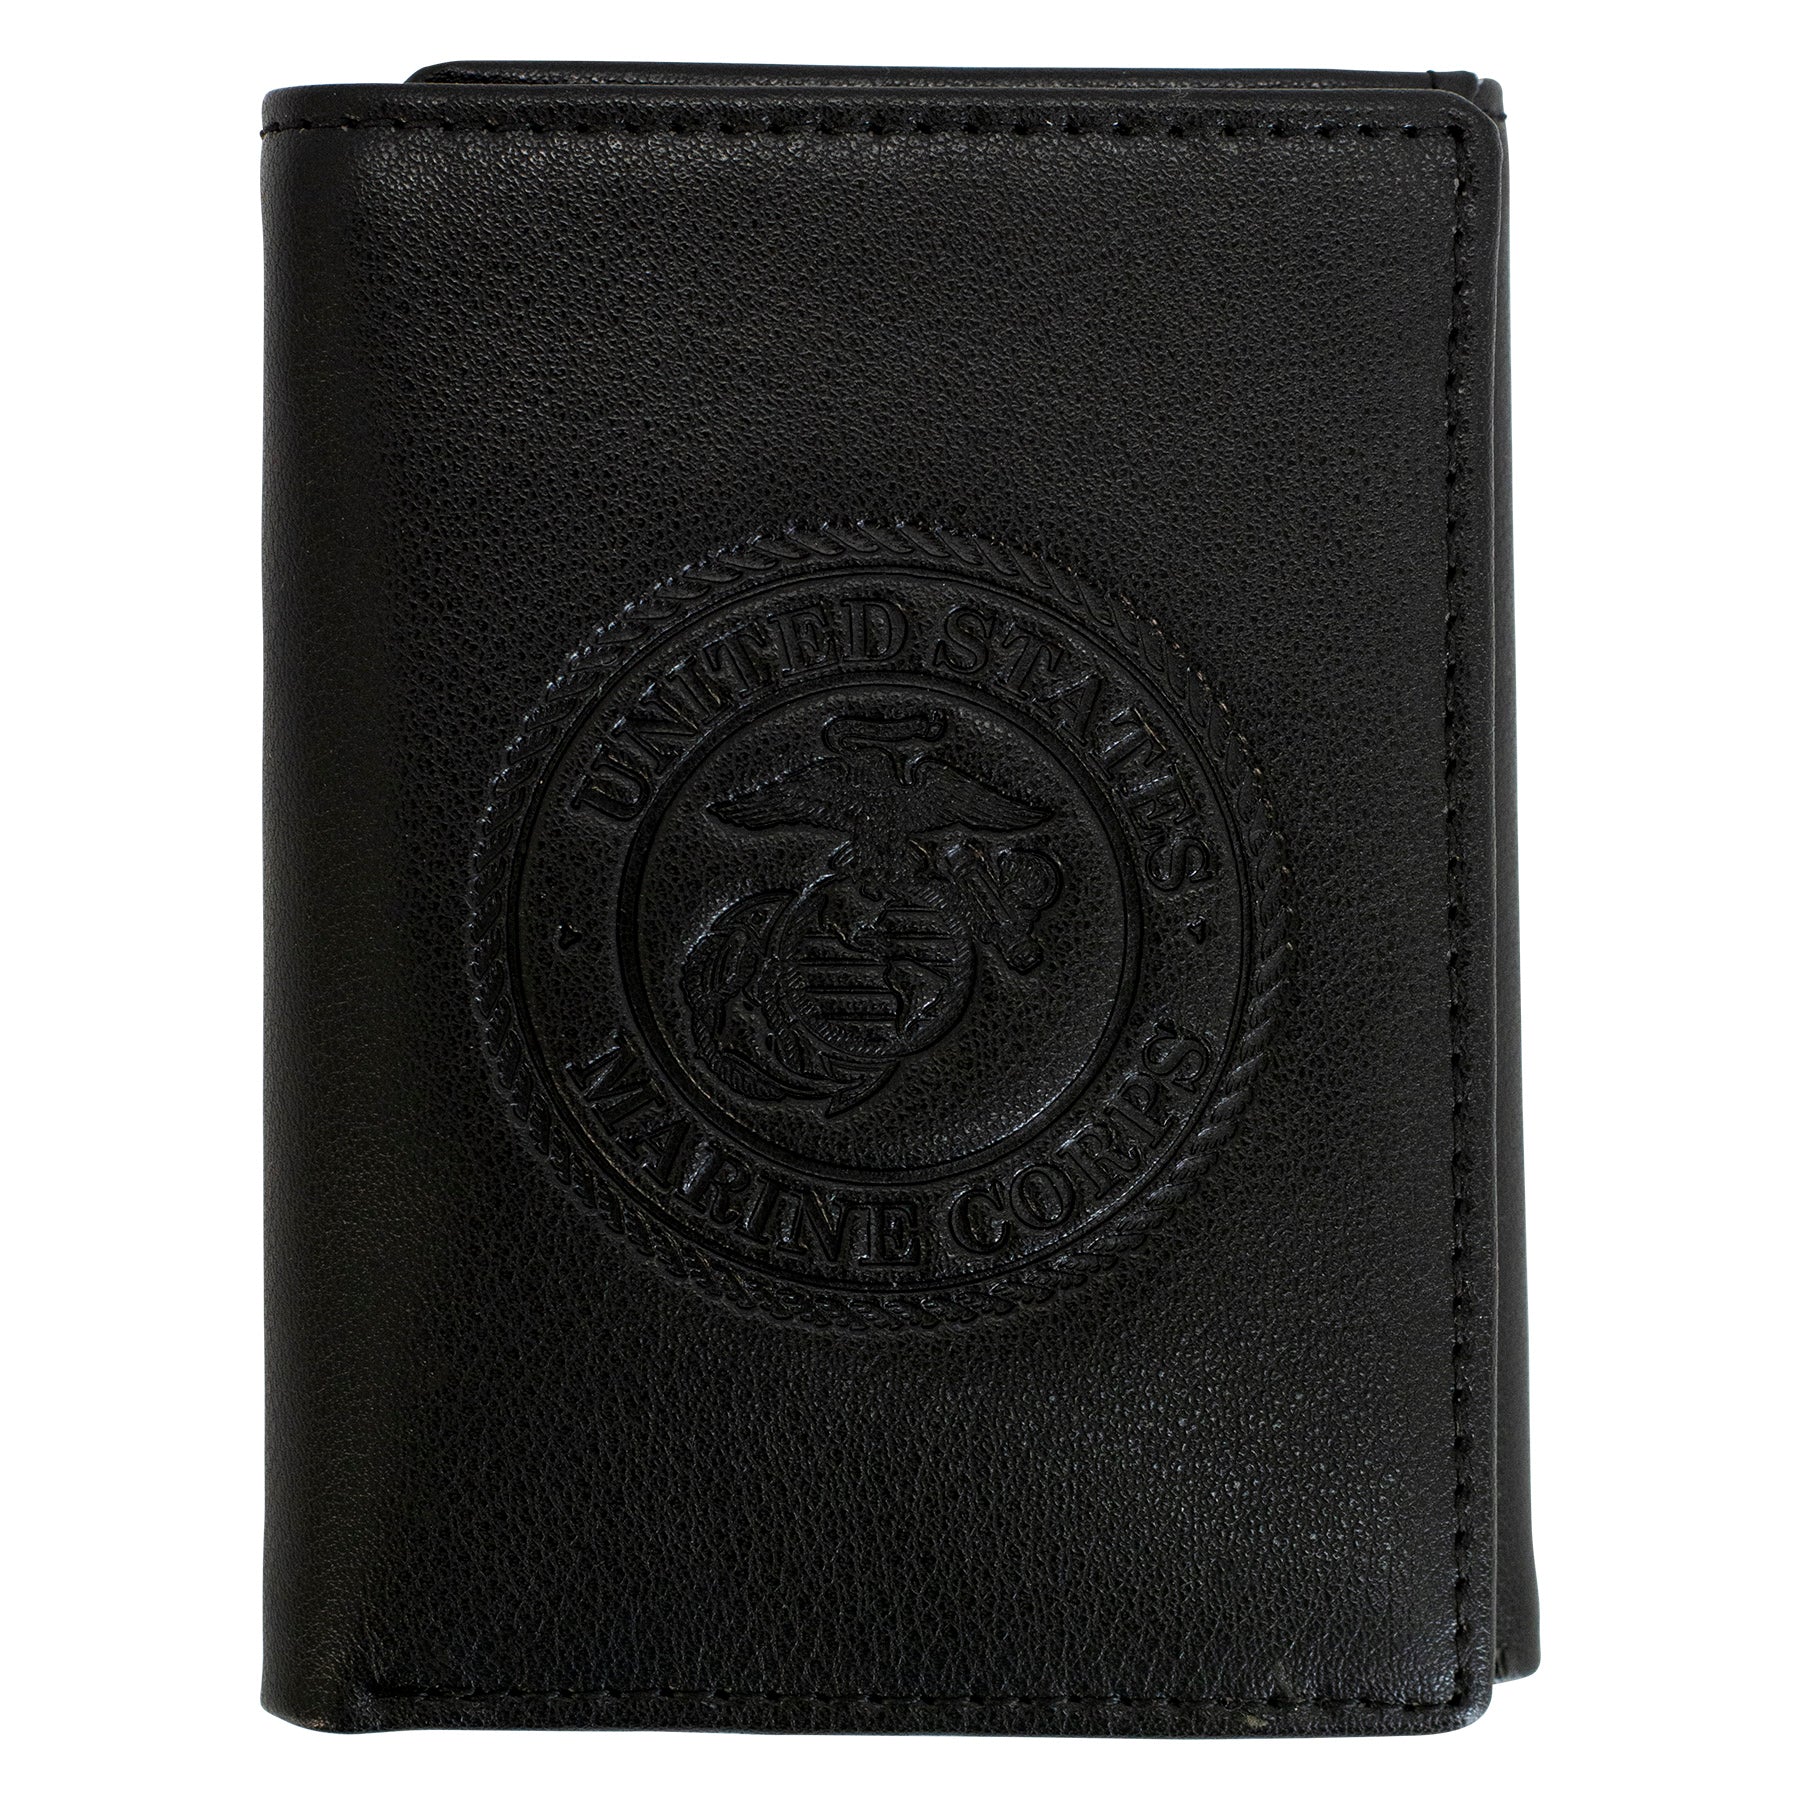 Licensed Embossed Military Wallets – RuggedRare